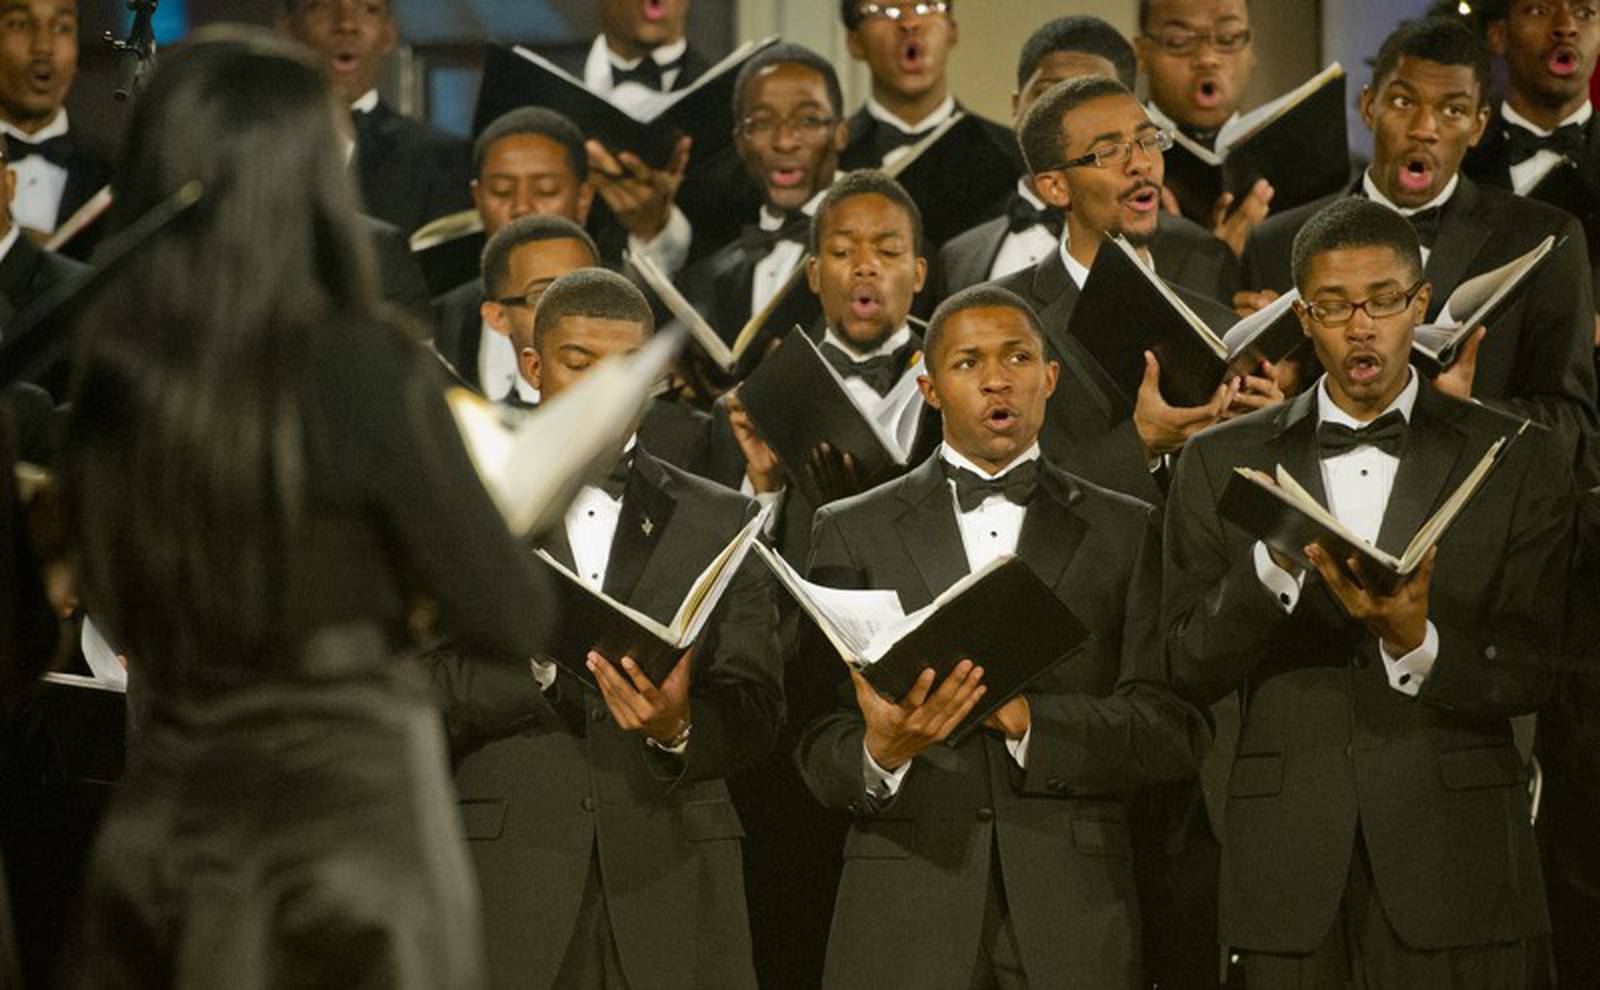 Annual SpelmanMorehouse Christmas concerts happening this weekend